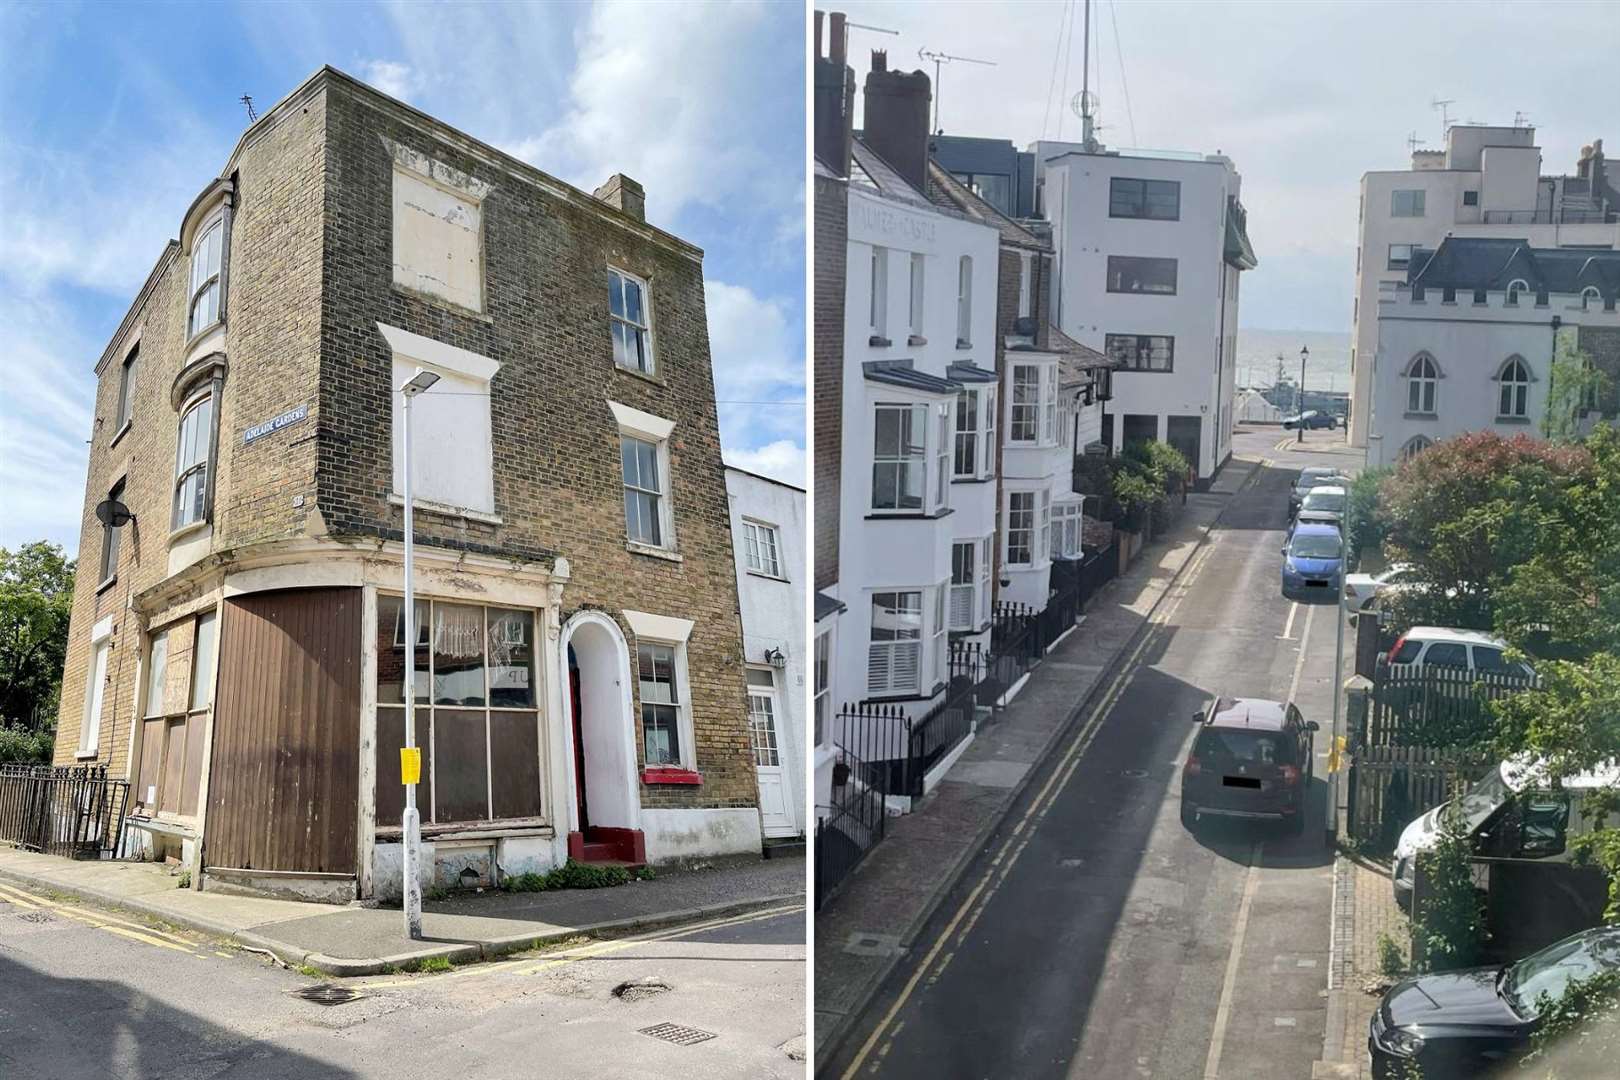 18 Albert Street in Ramsgate is up for auction for £110-£120,000 and boasts sea views. Picture: Clive Emson